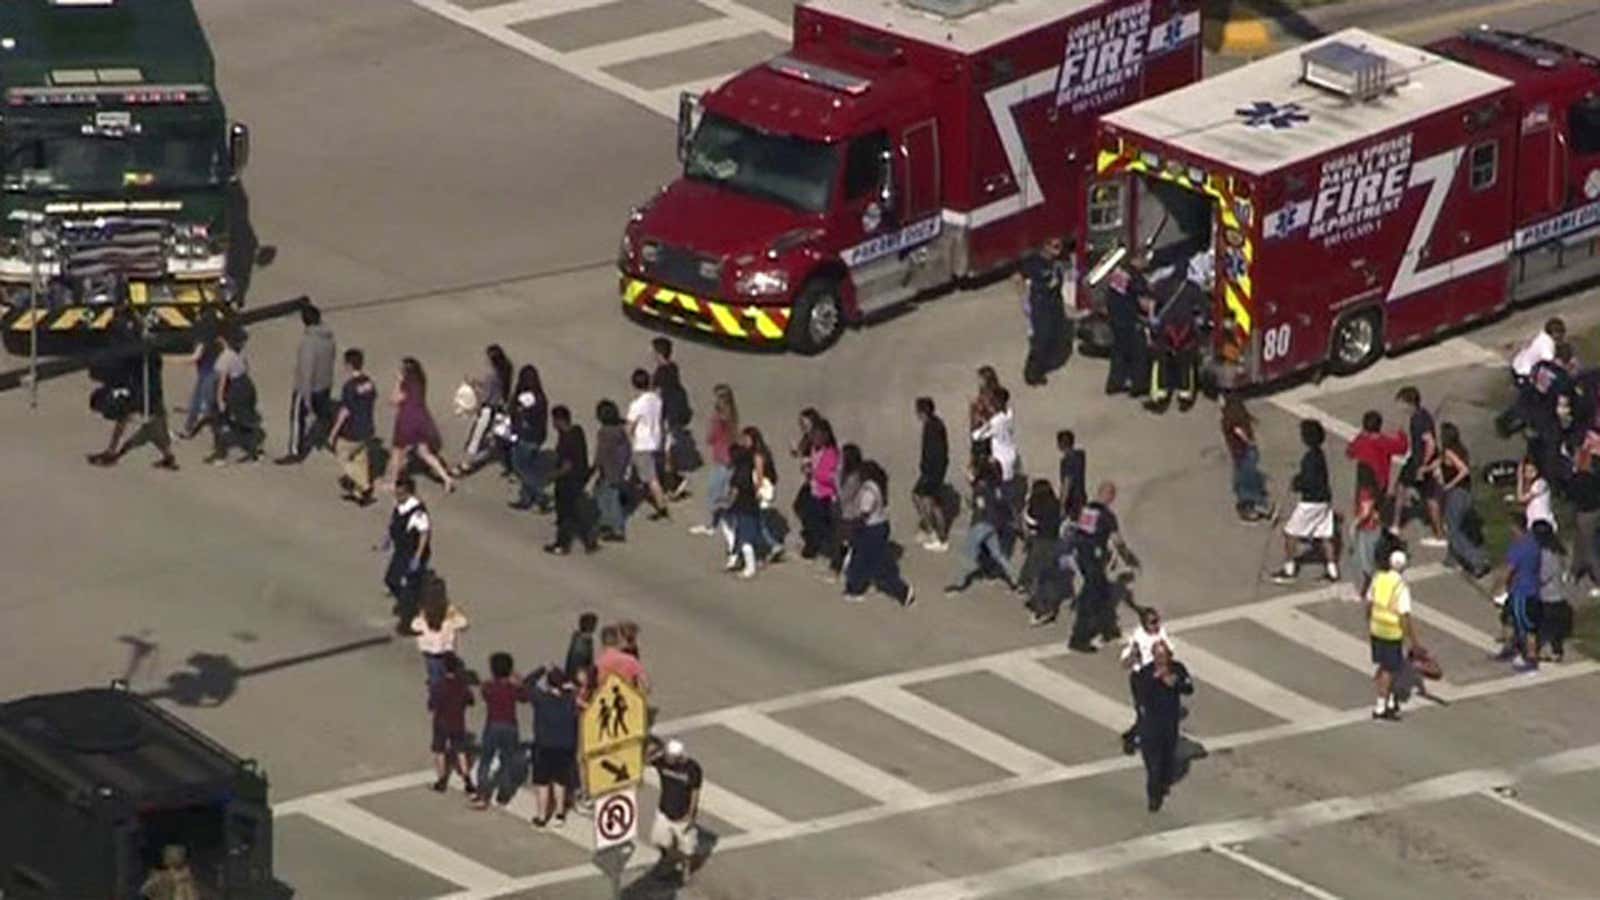 Students are evacuated from Marjory Stoneman Douglas High School during a shooting incident in Parkland, Florida on February 14, 2018 in a still image from video.